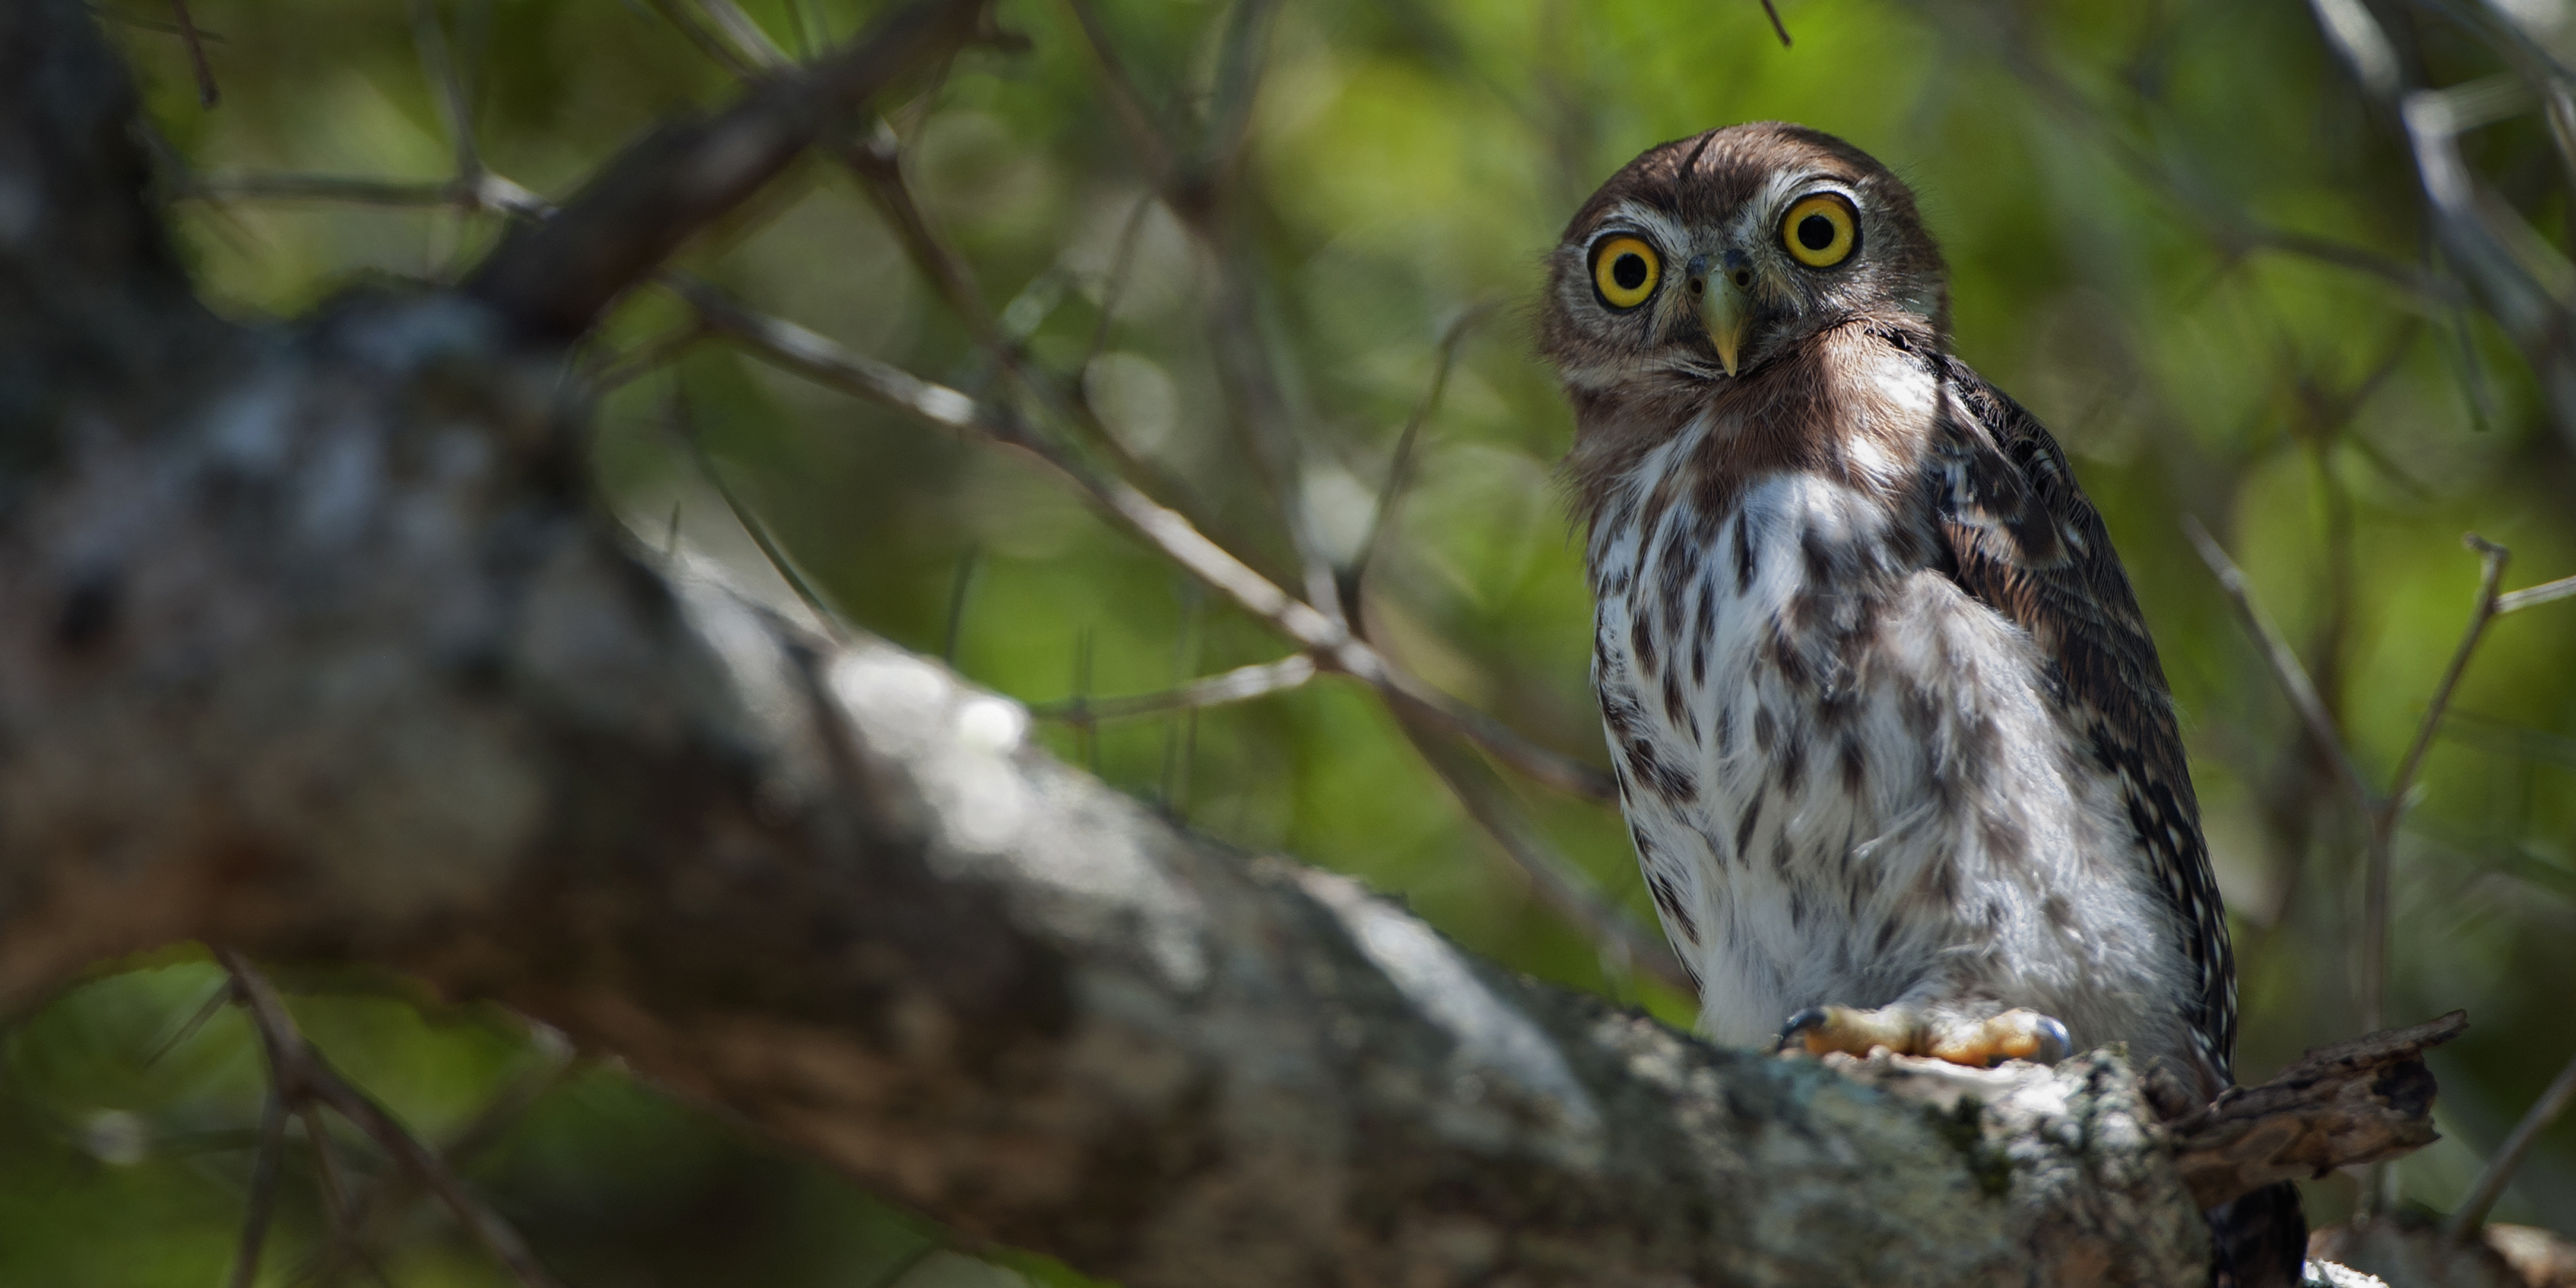 Last year in Cuba, Earthwatch volunteers planted 1,050 native trees and built 20 artificial nests to help the endemic Cuban trogon, Cuban pygmy owl, and bare-legged owl.